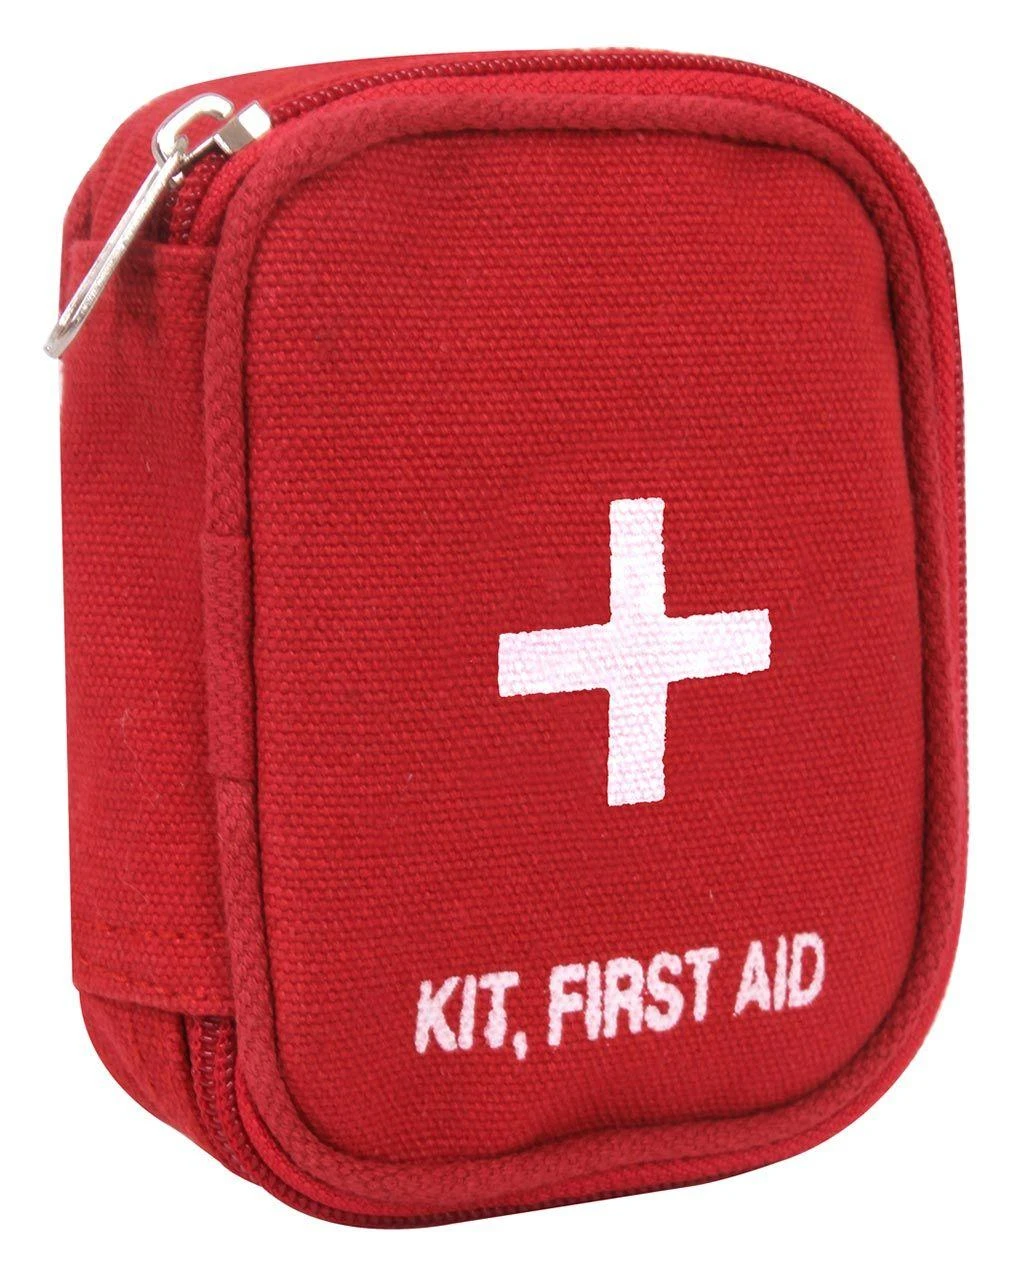 Buy Rothco Military First Aid Kit w. Zip, Money Back Guarantee